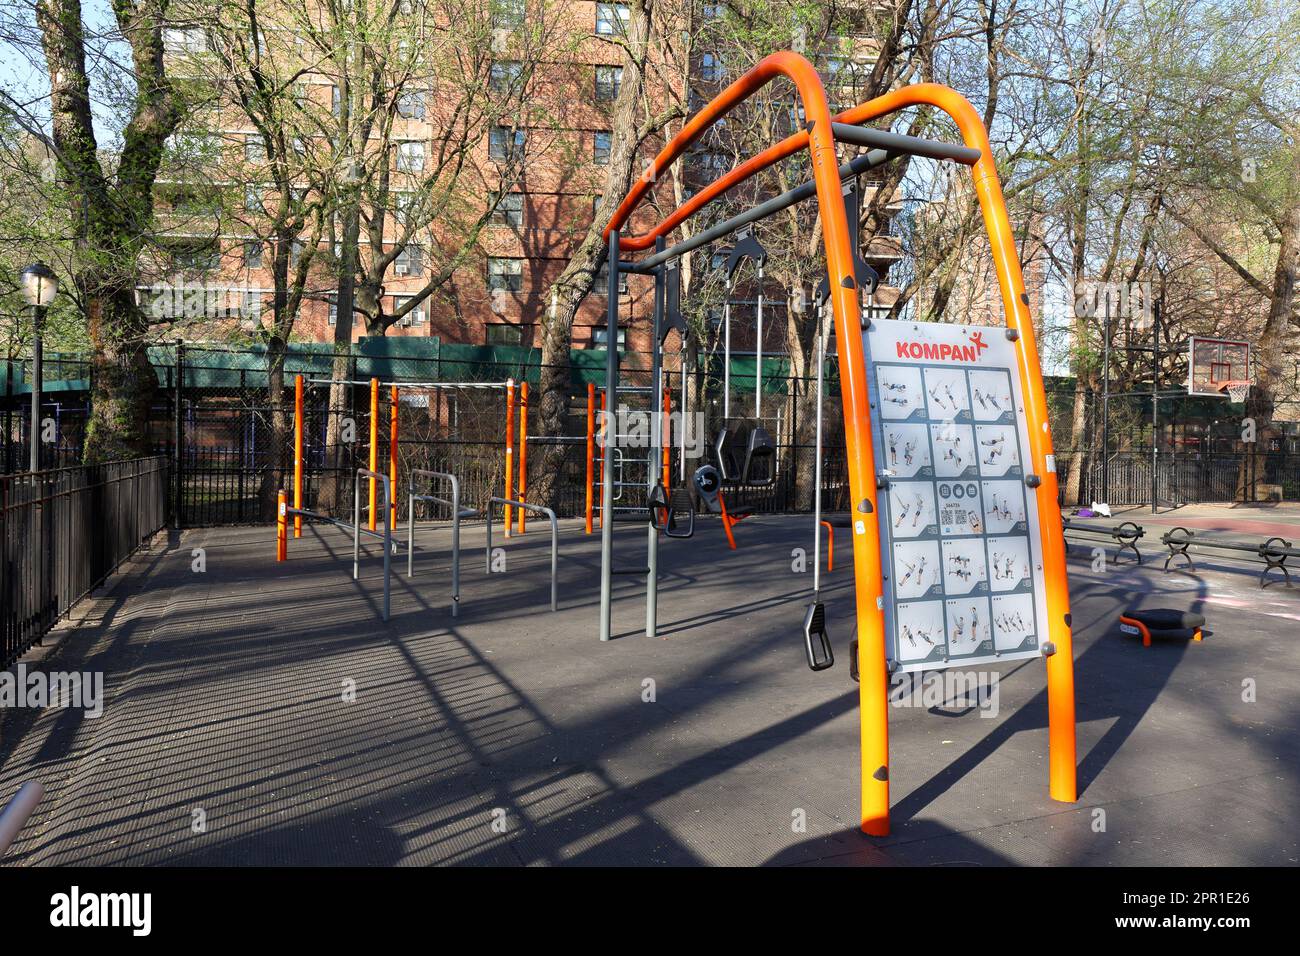 Kompan outdoor exercise and gym equipment for fitness training, and street workout at Seward Park in Manhattan's Lower East Side, New York City. Stock Photo